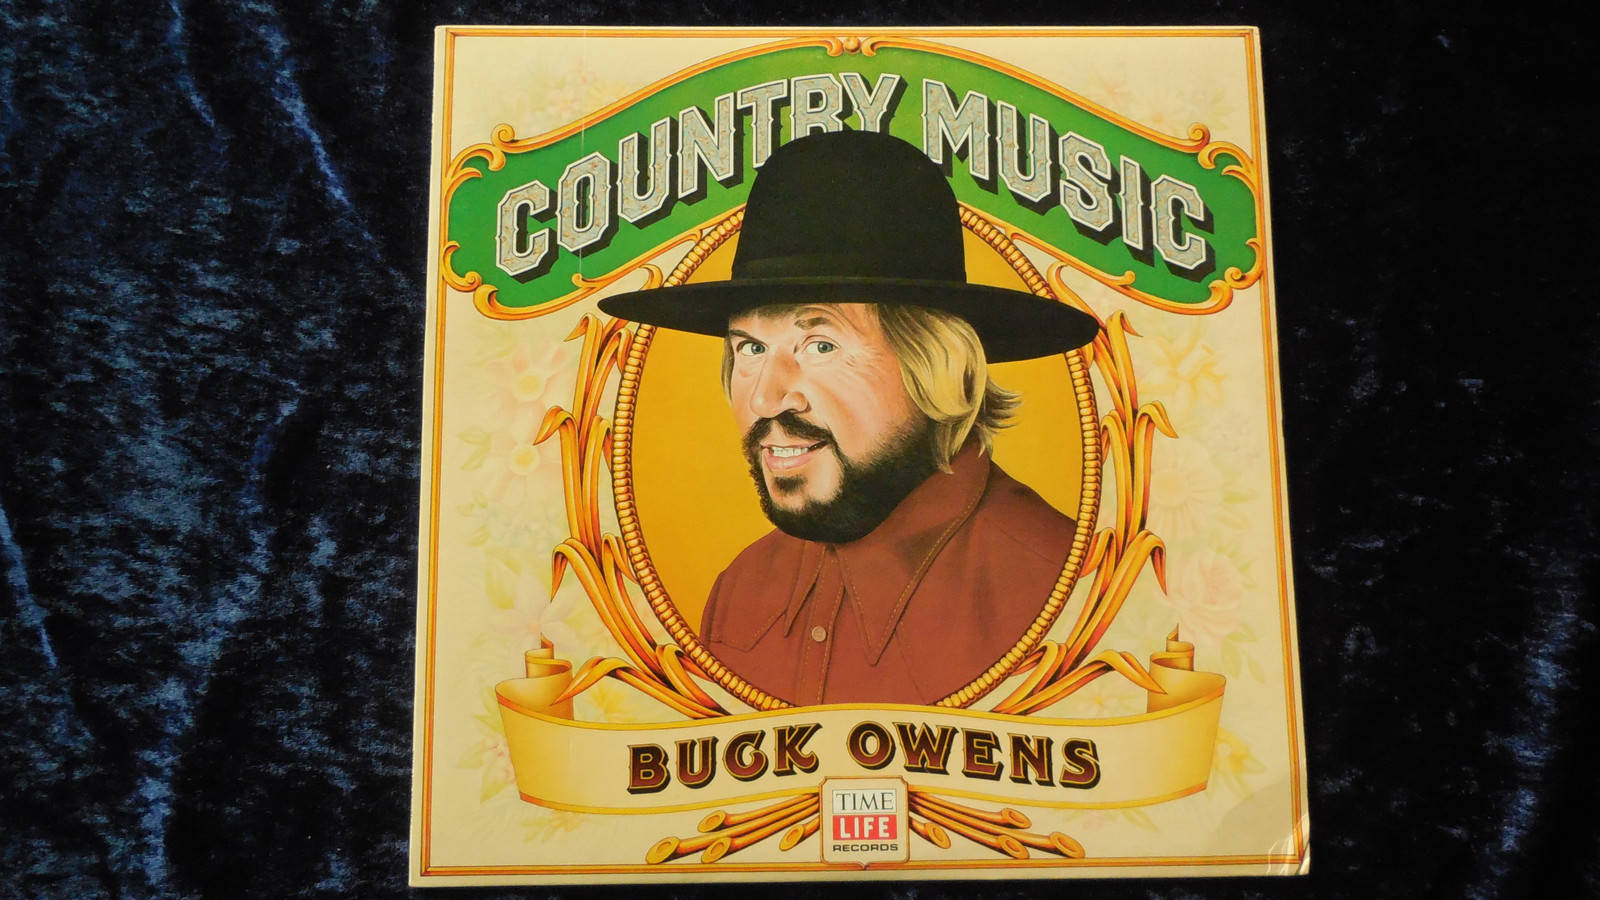 Buckowens Country Music Time Life Records: Buck Owens Country Music Time Life Records. Wallpaper